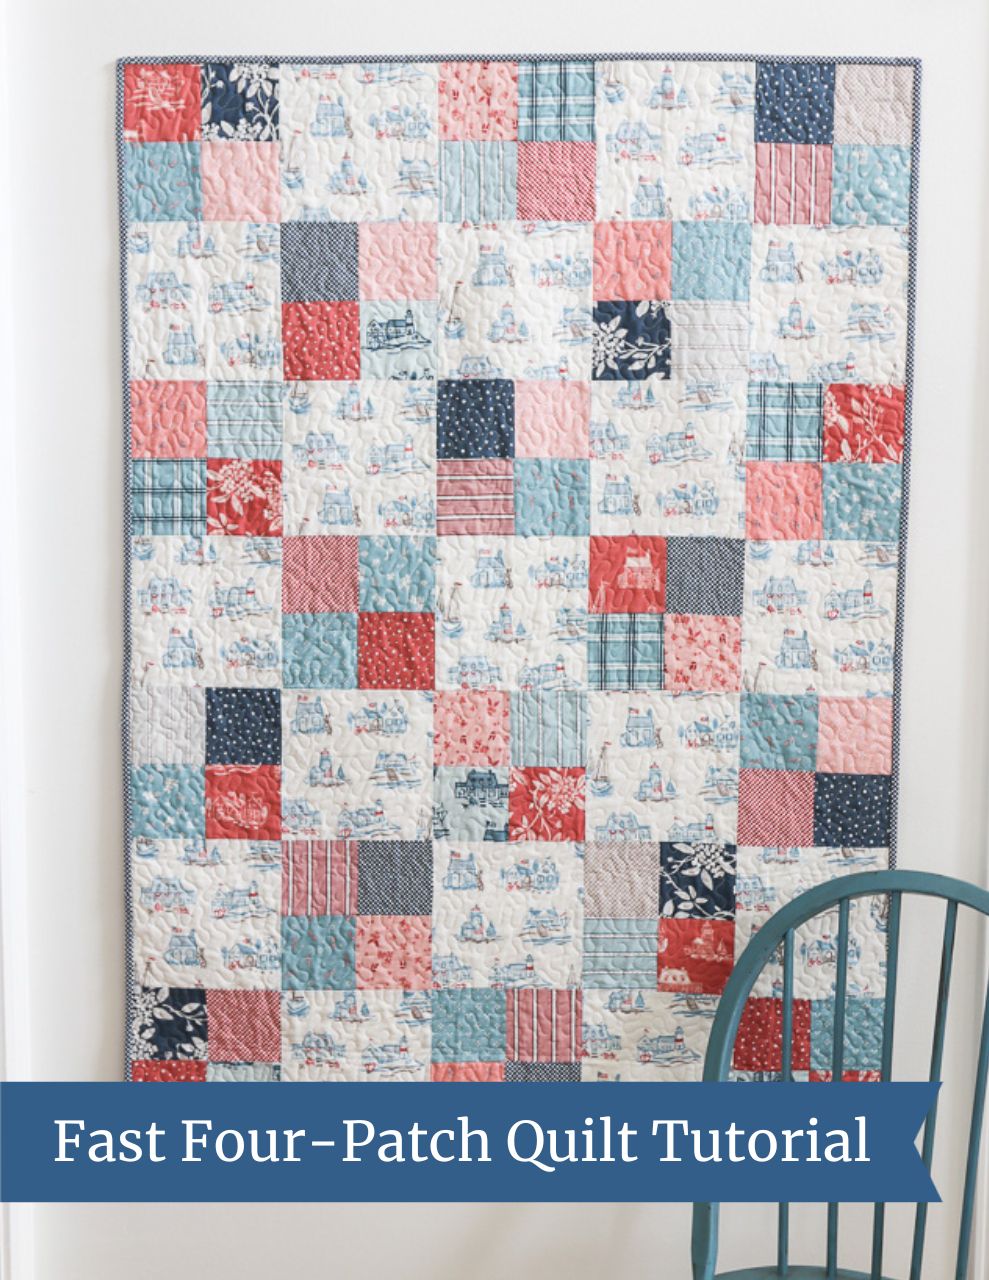 Fast Four Patch Quilt Tutorial + KITS - Diary of a Quilter